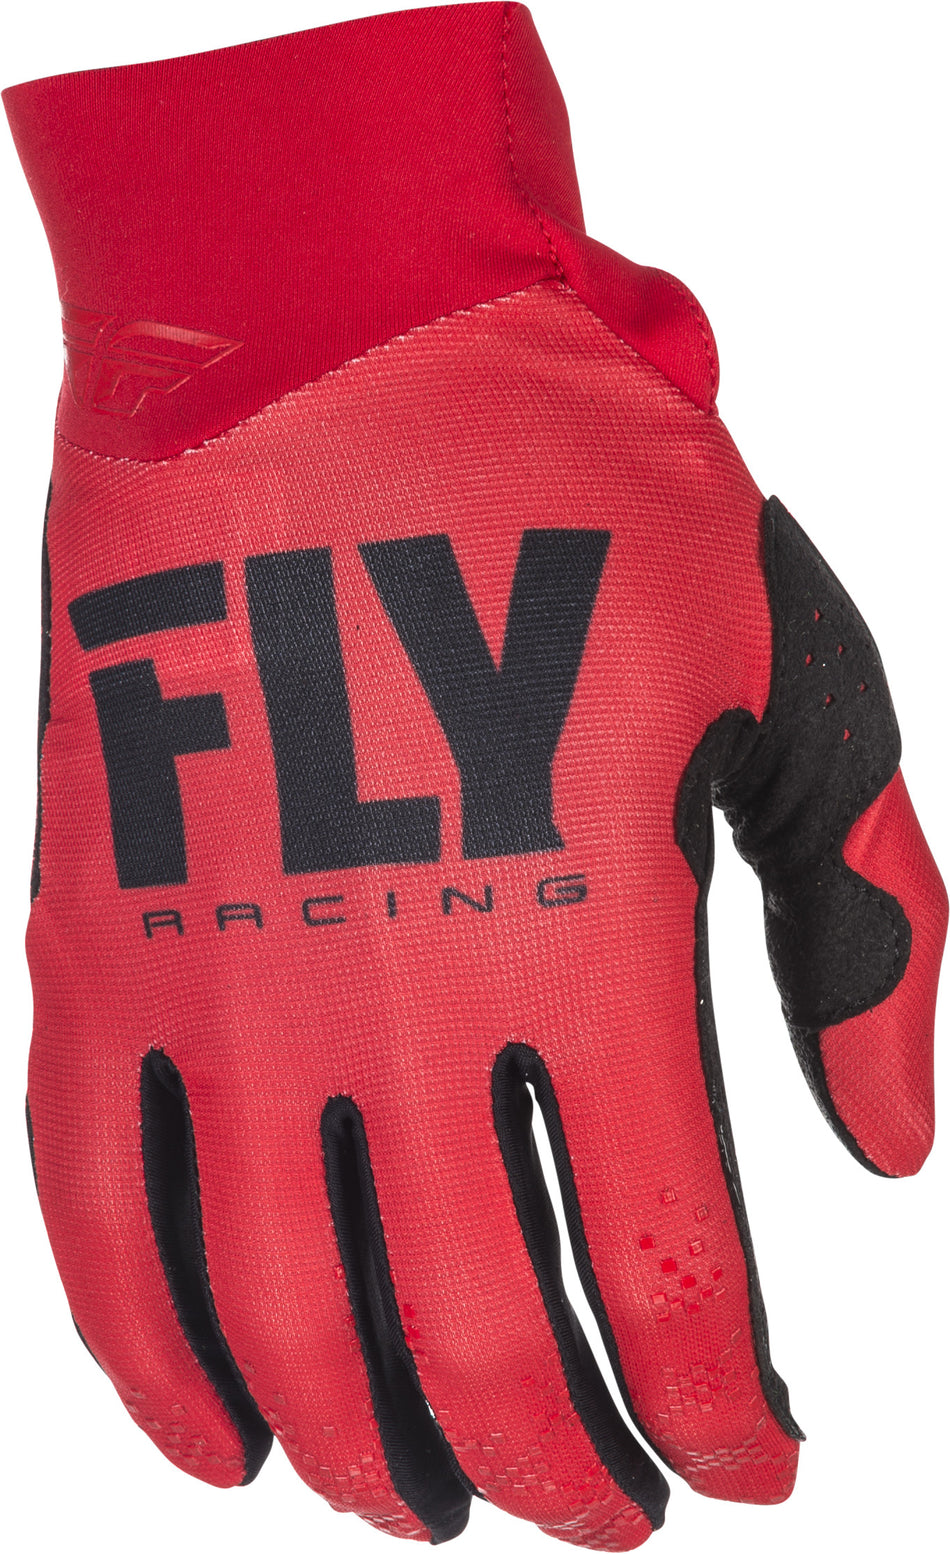 FLY RACING Pro Lite Gloves Red Sz 12 371-81212